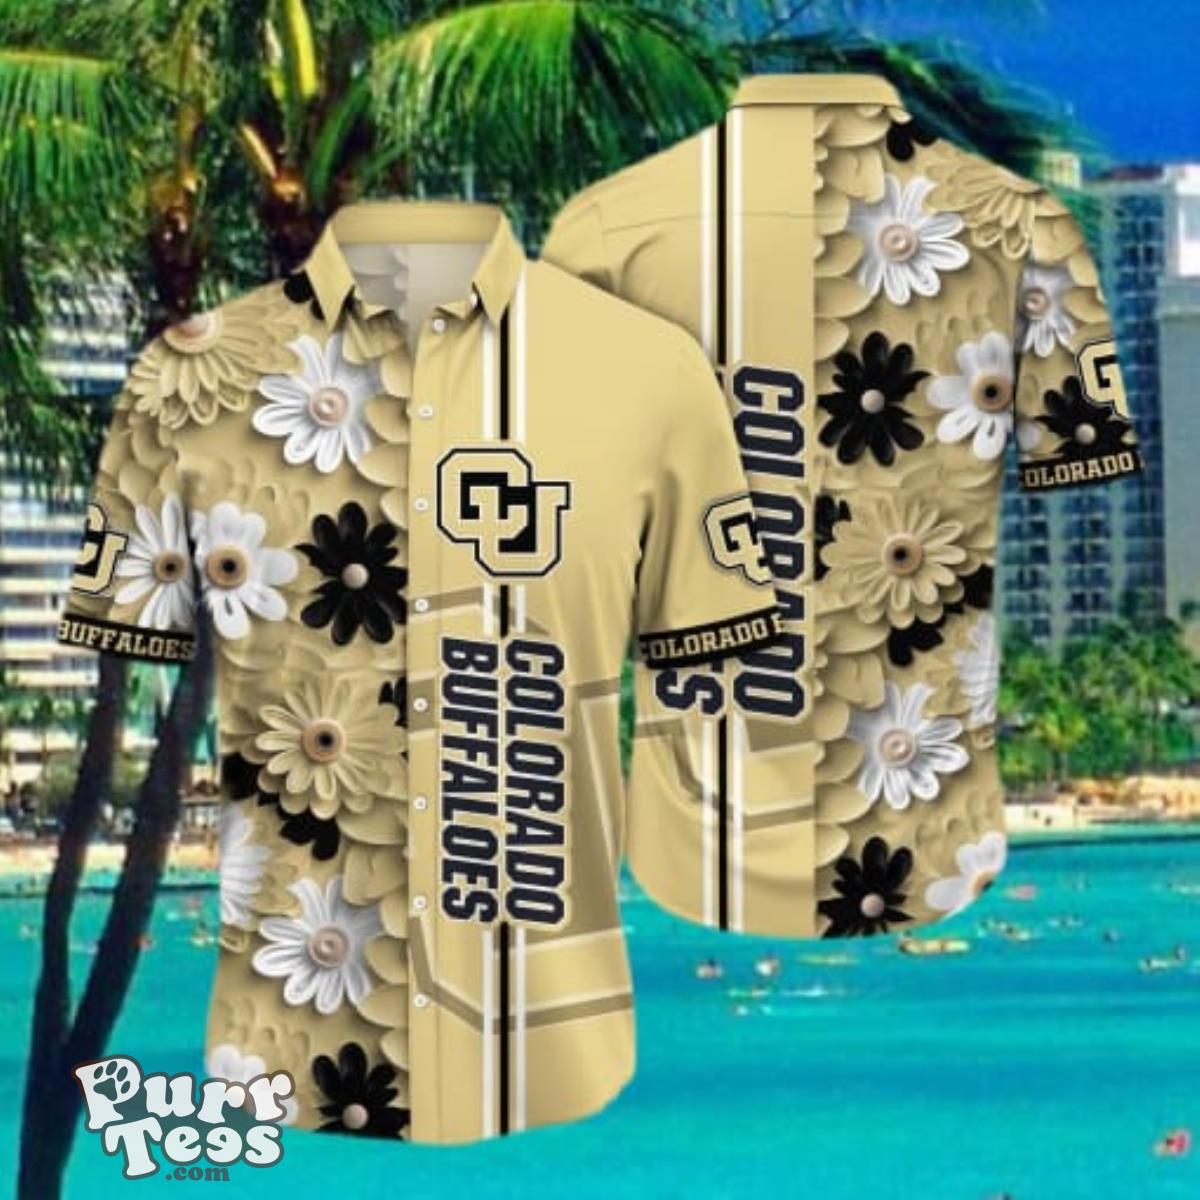 Colorado Buffaloes NCAA Flower Hawaii Shirt And Tshirt For Fans Style Gifts Product Photo 1